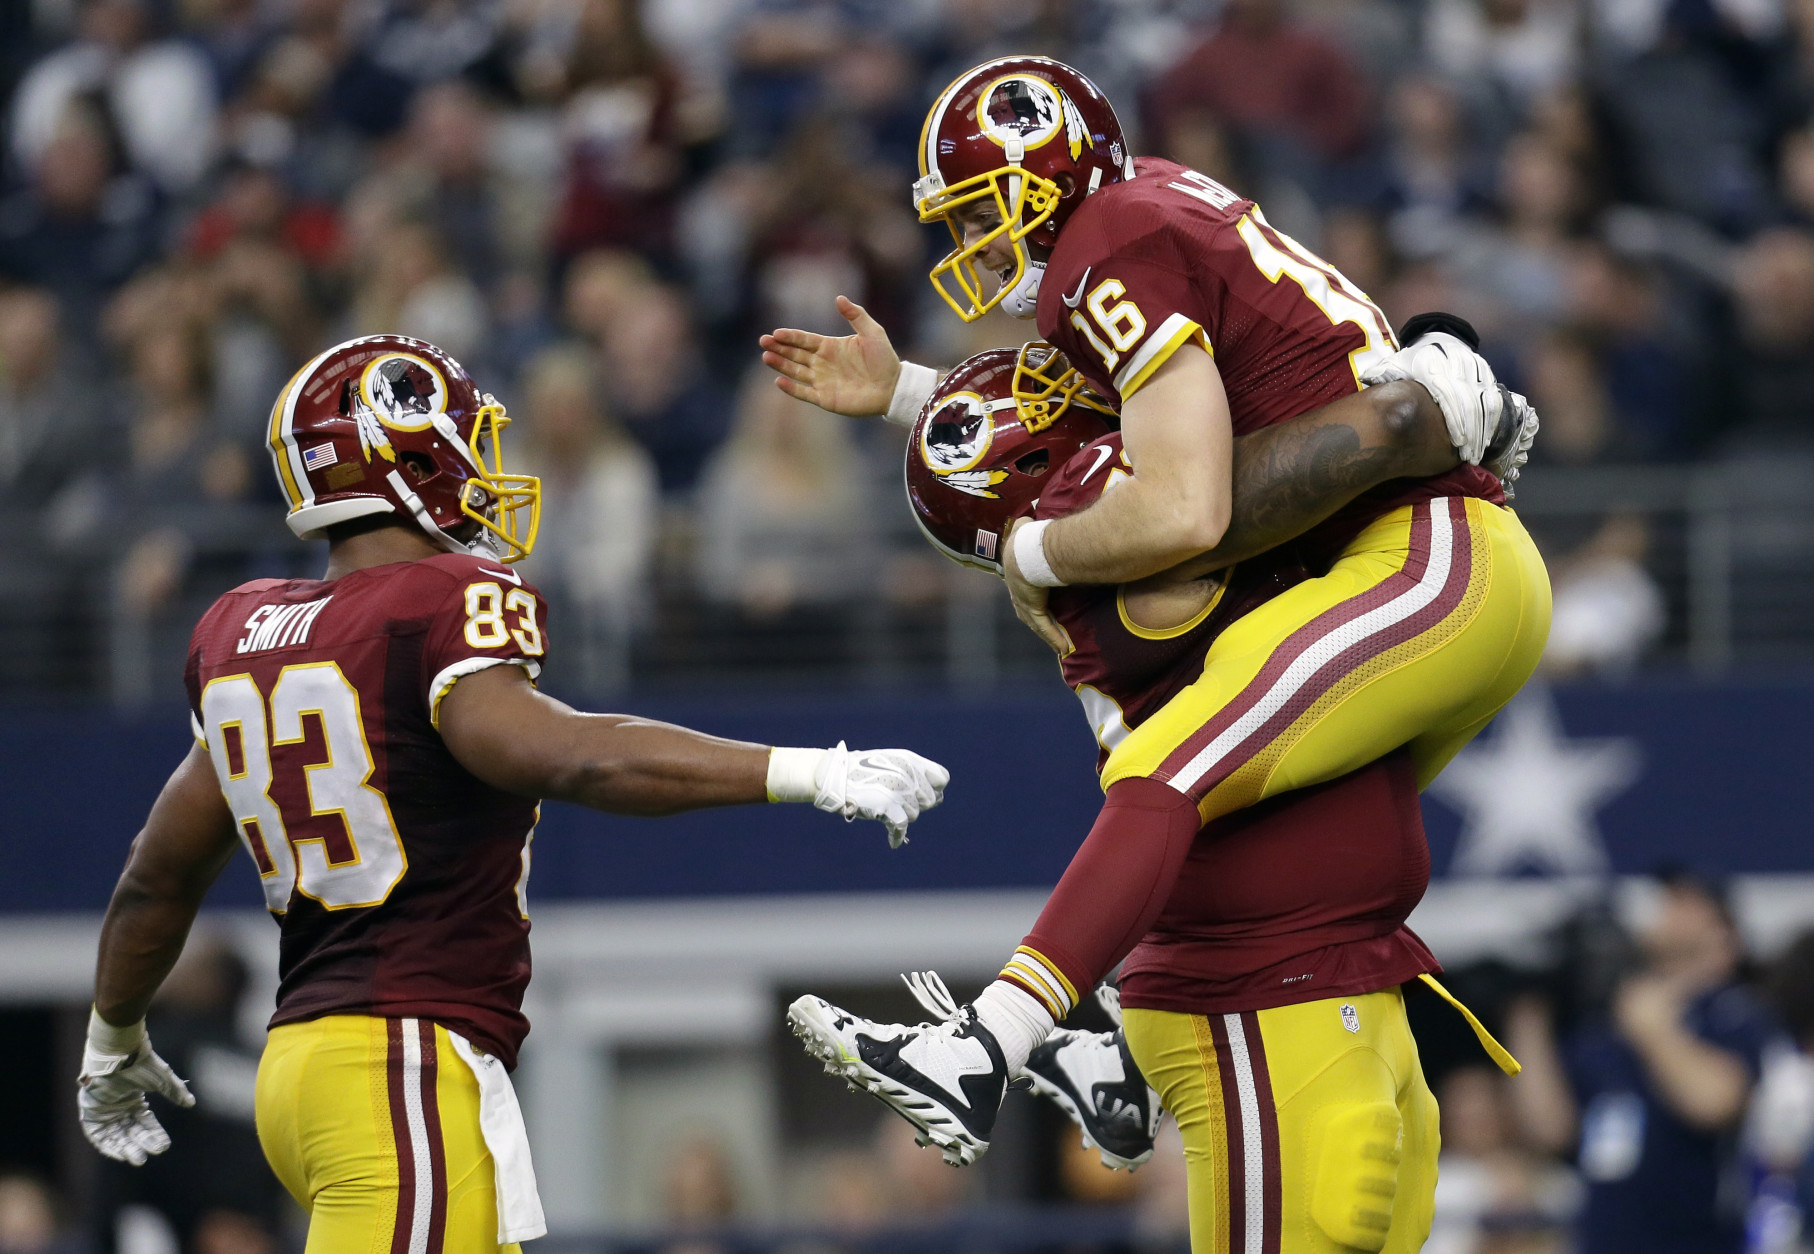 Washington Redskins' Alex Smith (83) and Spencer Long, carrying Colt McCoy (16), celebrate a long pass caught by Rashad Ross for a touchdown in the second half of an NFL football game against the Dallas Cowboys, Sunday, Jan. 3, 2016, in Arlington, Texas. (AP Photo/Tim Sharp)